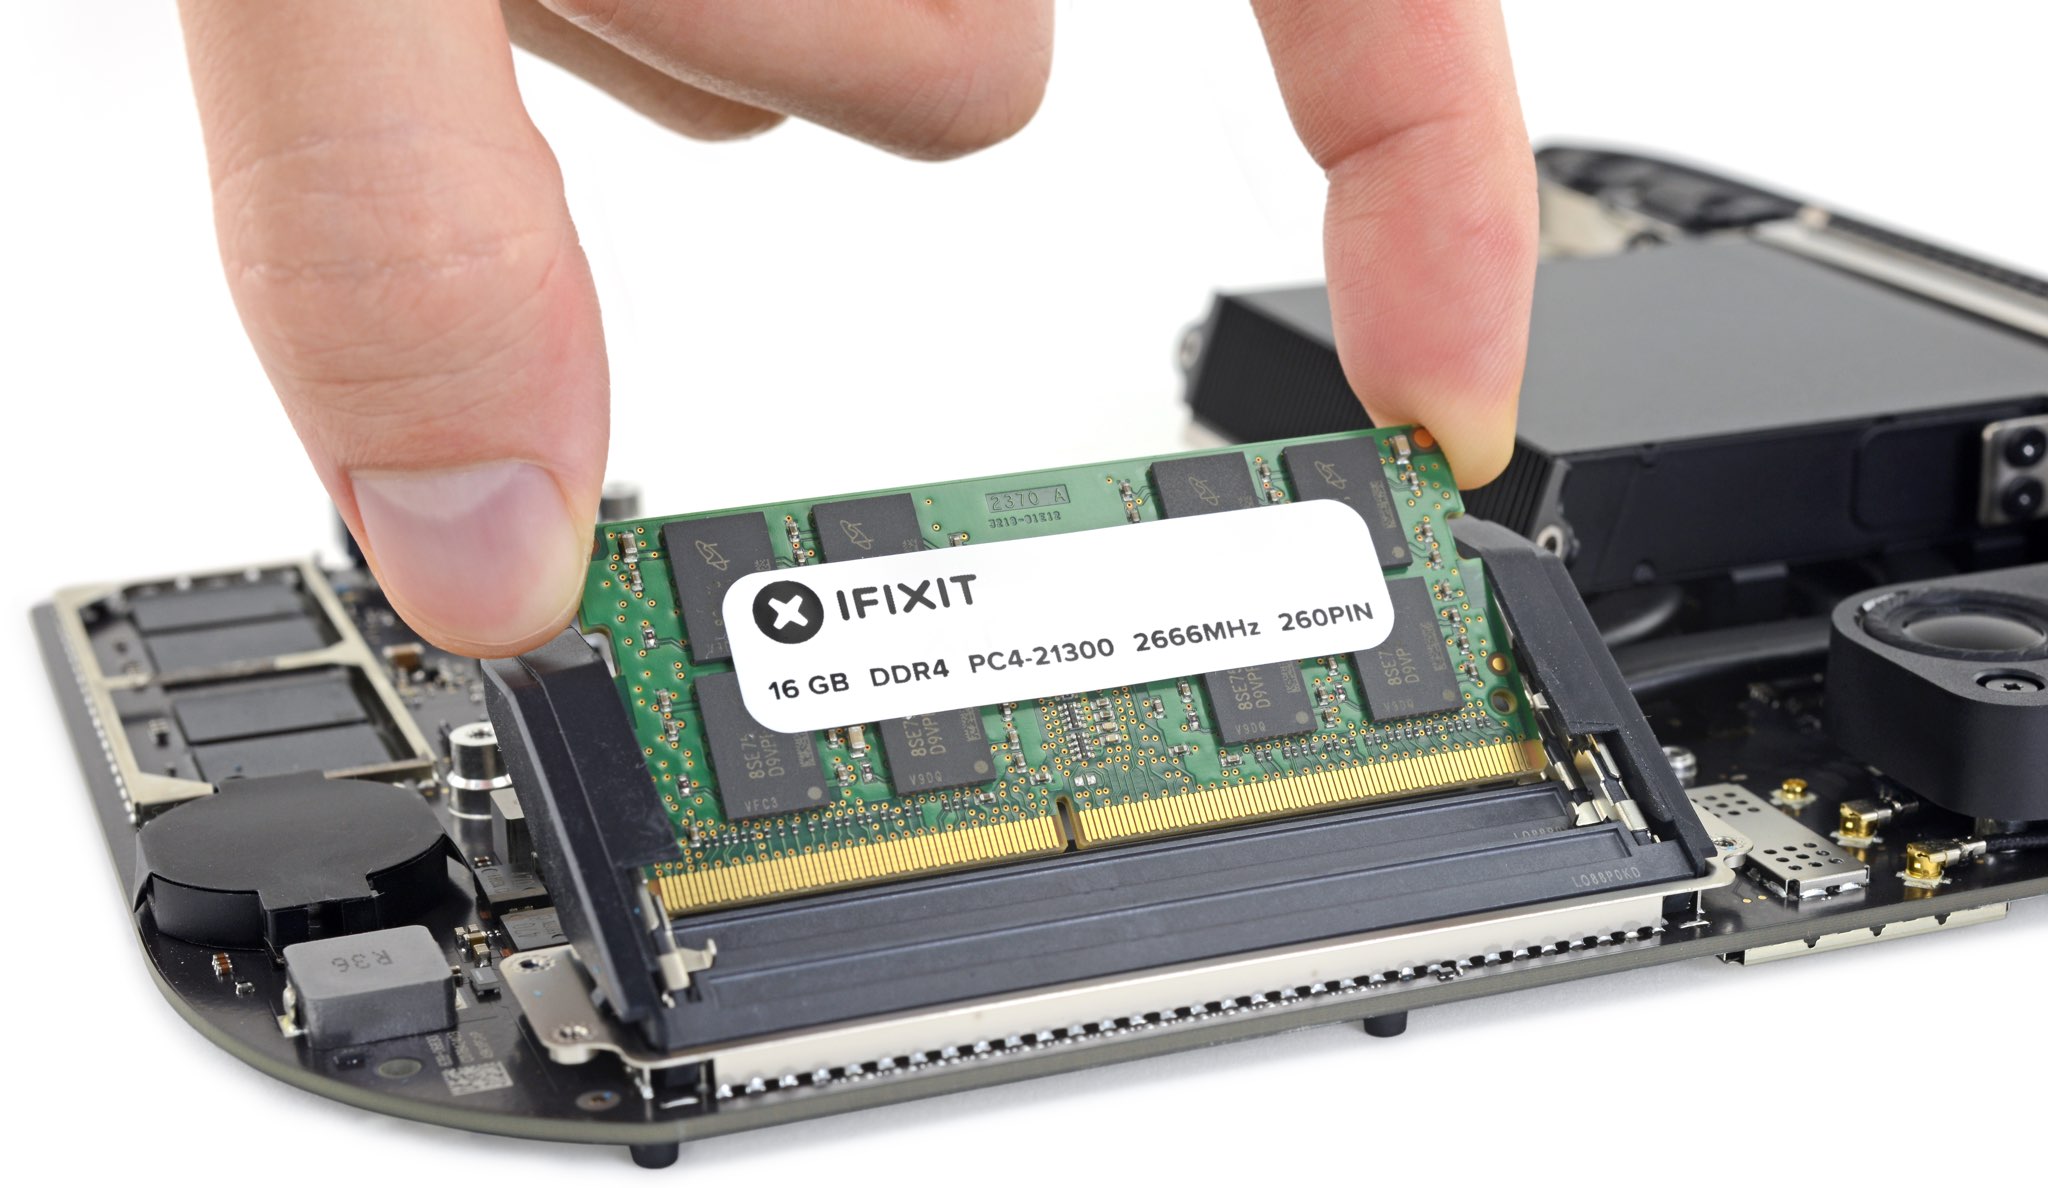 Arado Frustración refrigerador Save hundreds of dollars by upgrading RAM in your 2018 Mac mini with  iFixit's DIY kit